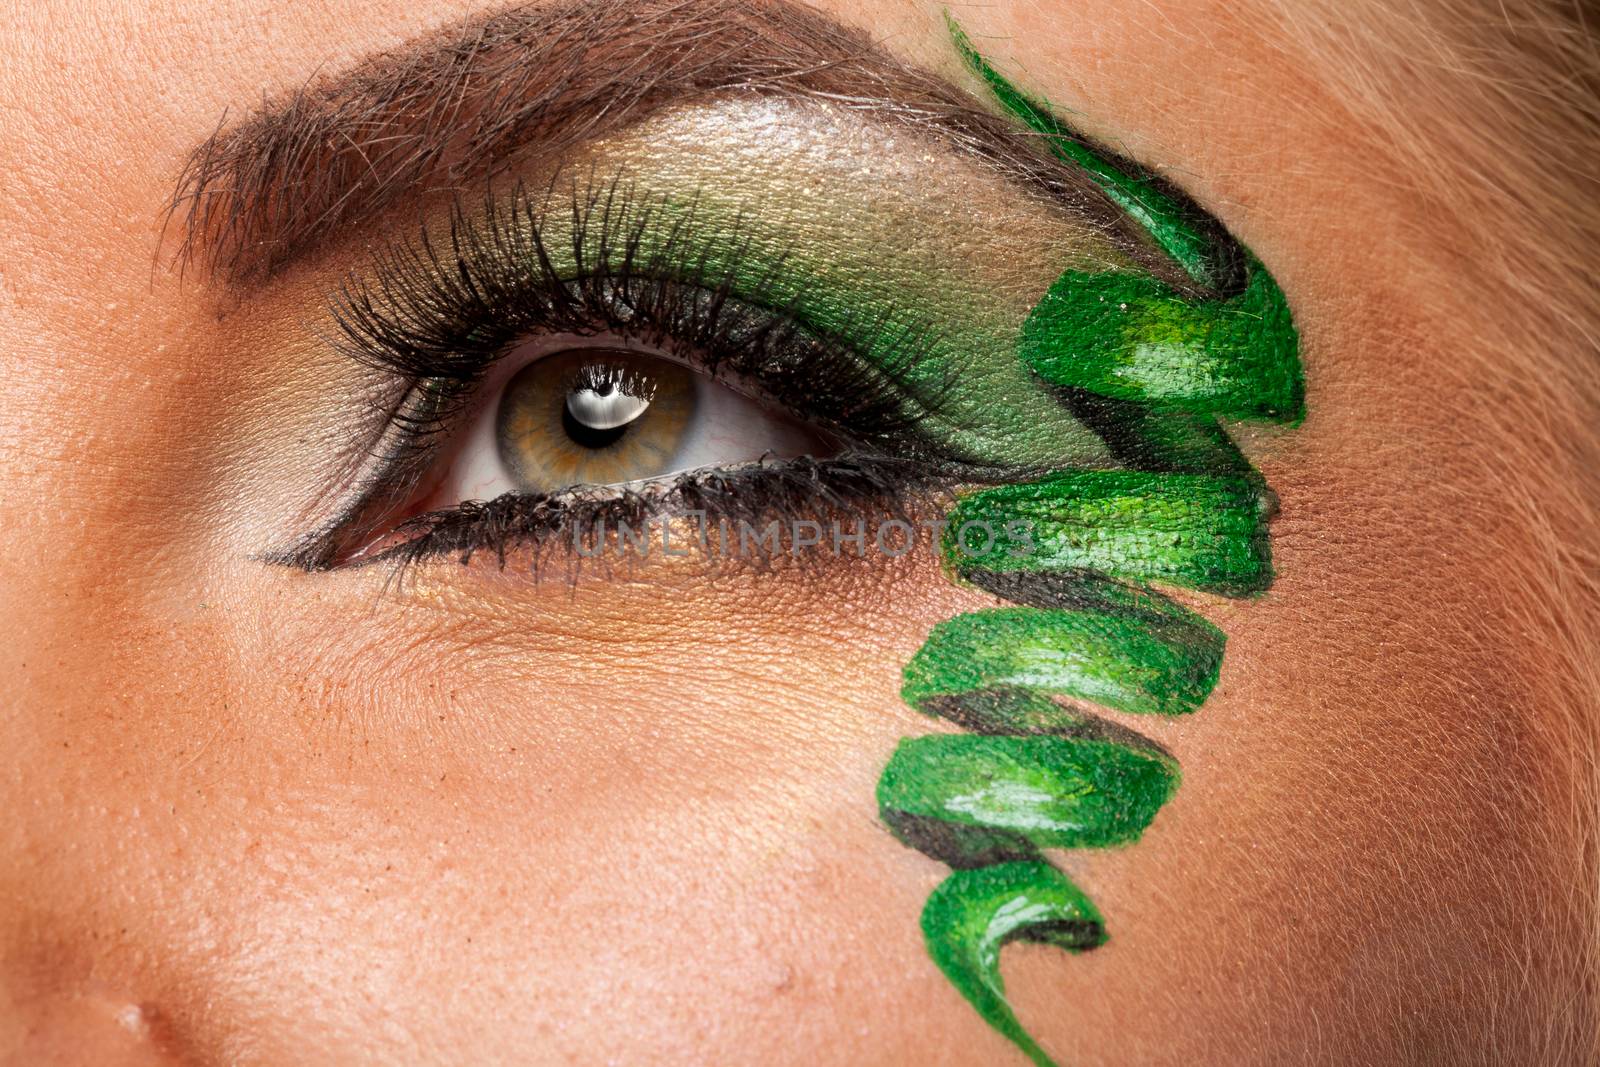 Close up of attractive eye with green artistic make up in studio photo